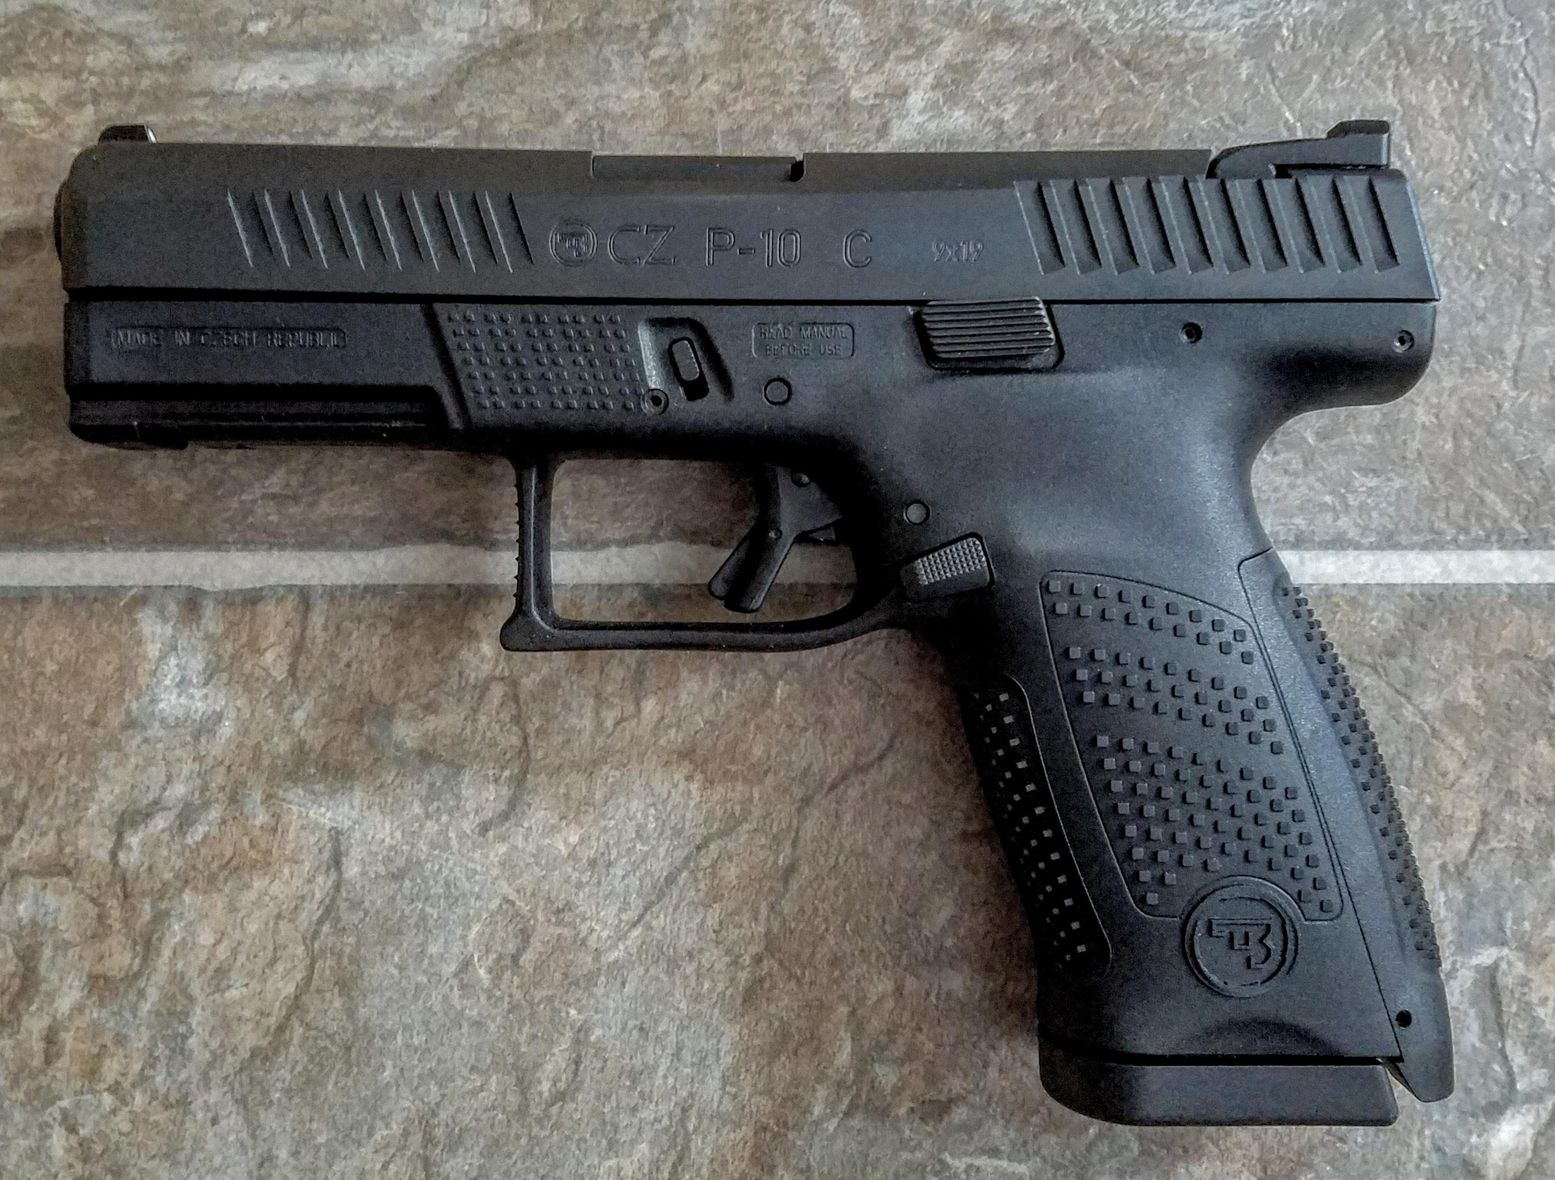 How Does the CZ P10 Stack up Against the Glock 19? | The ...